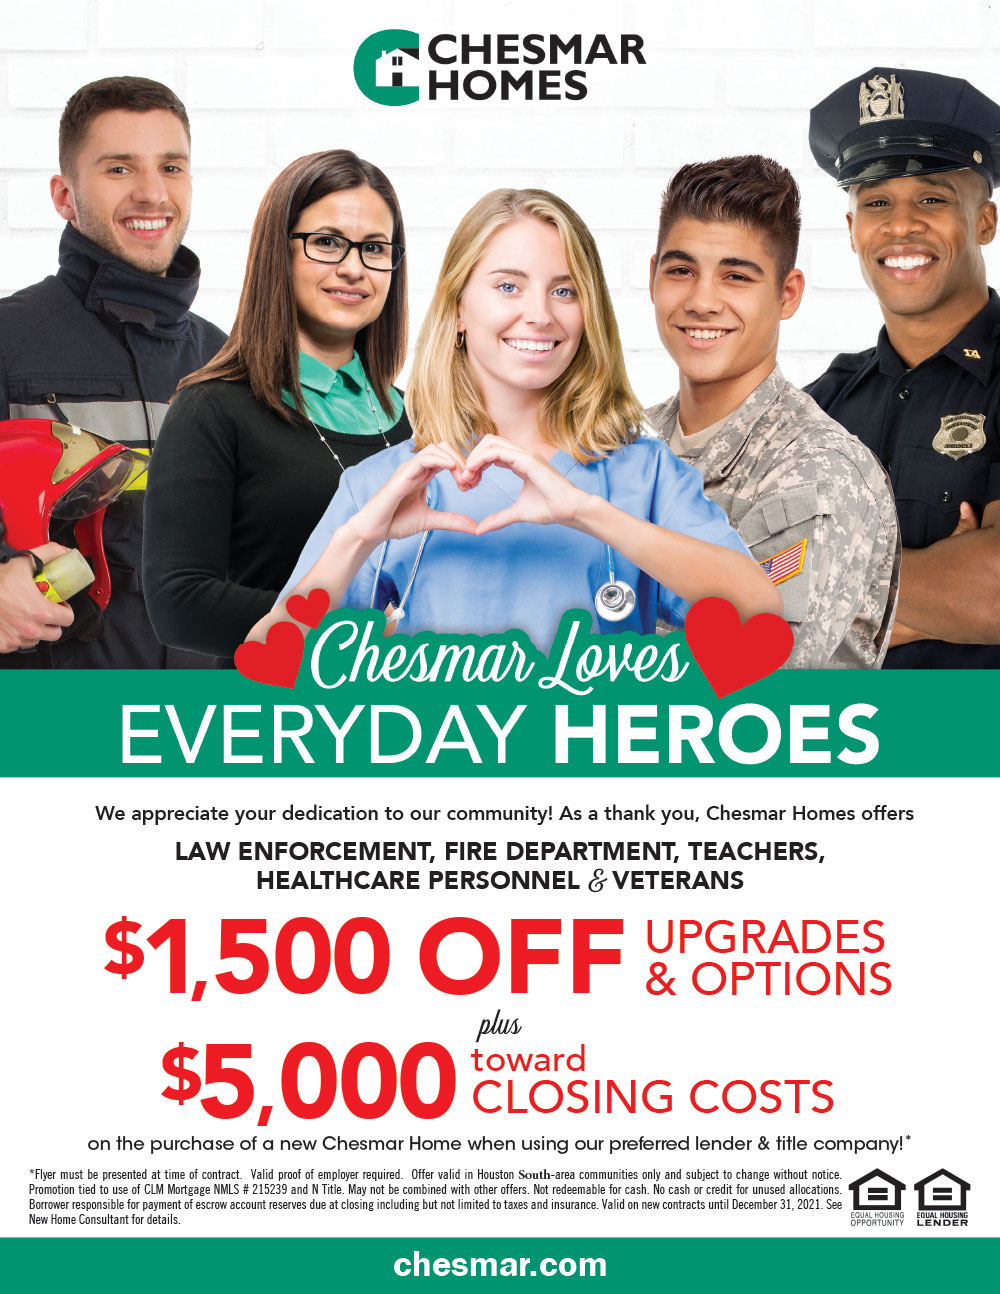 Chesmar Loves Everyday Heroes with housing incentives